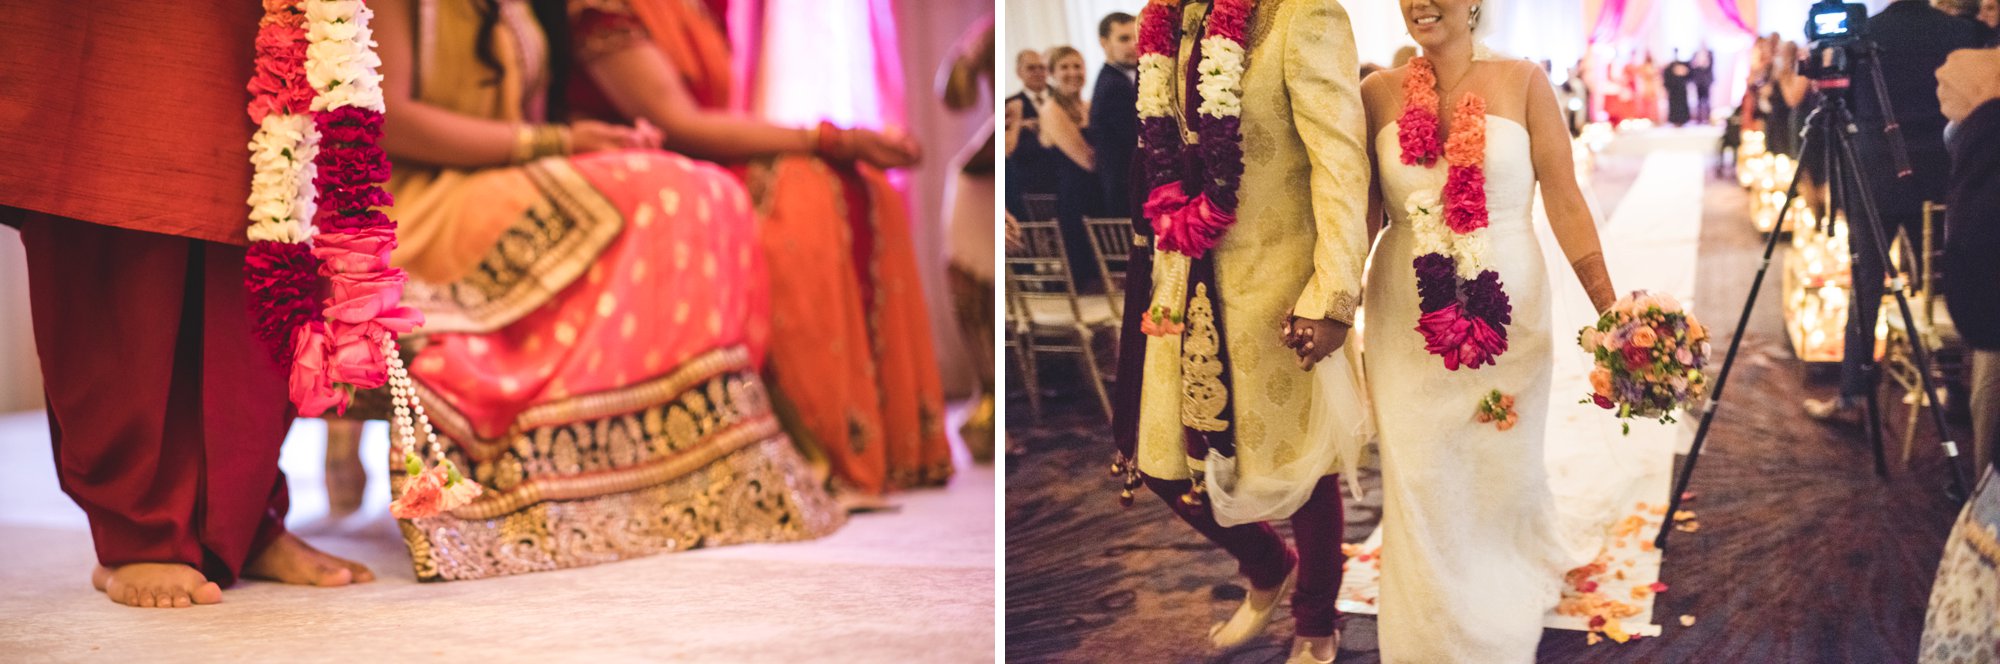 Washington DC colorful Indian wedding with a feminist bride. Ceremony.